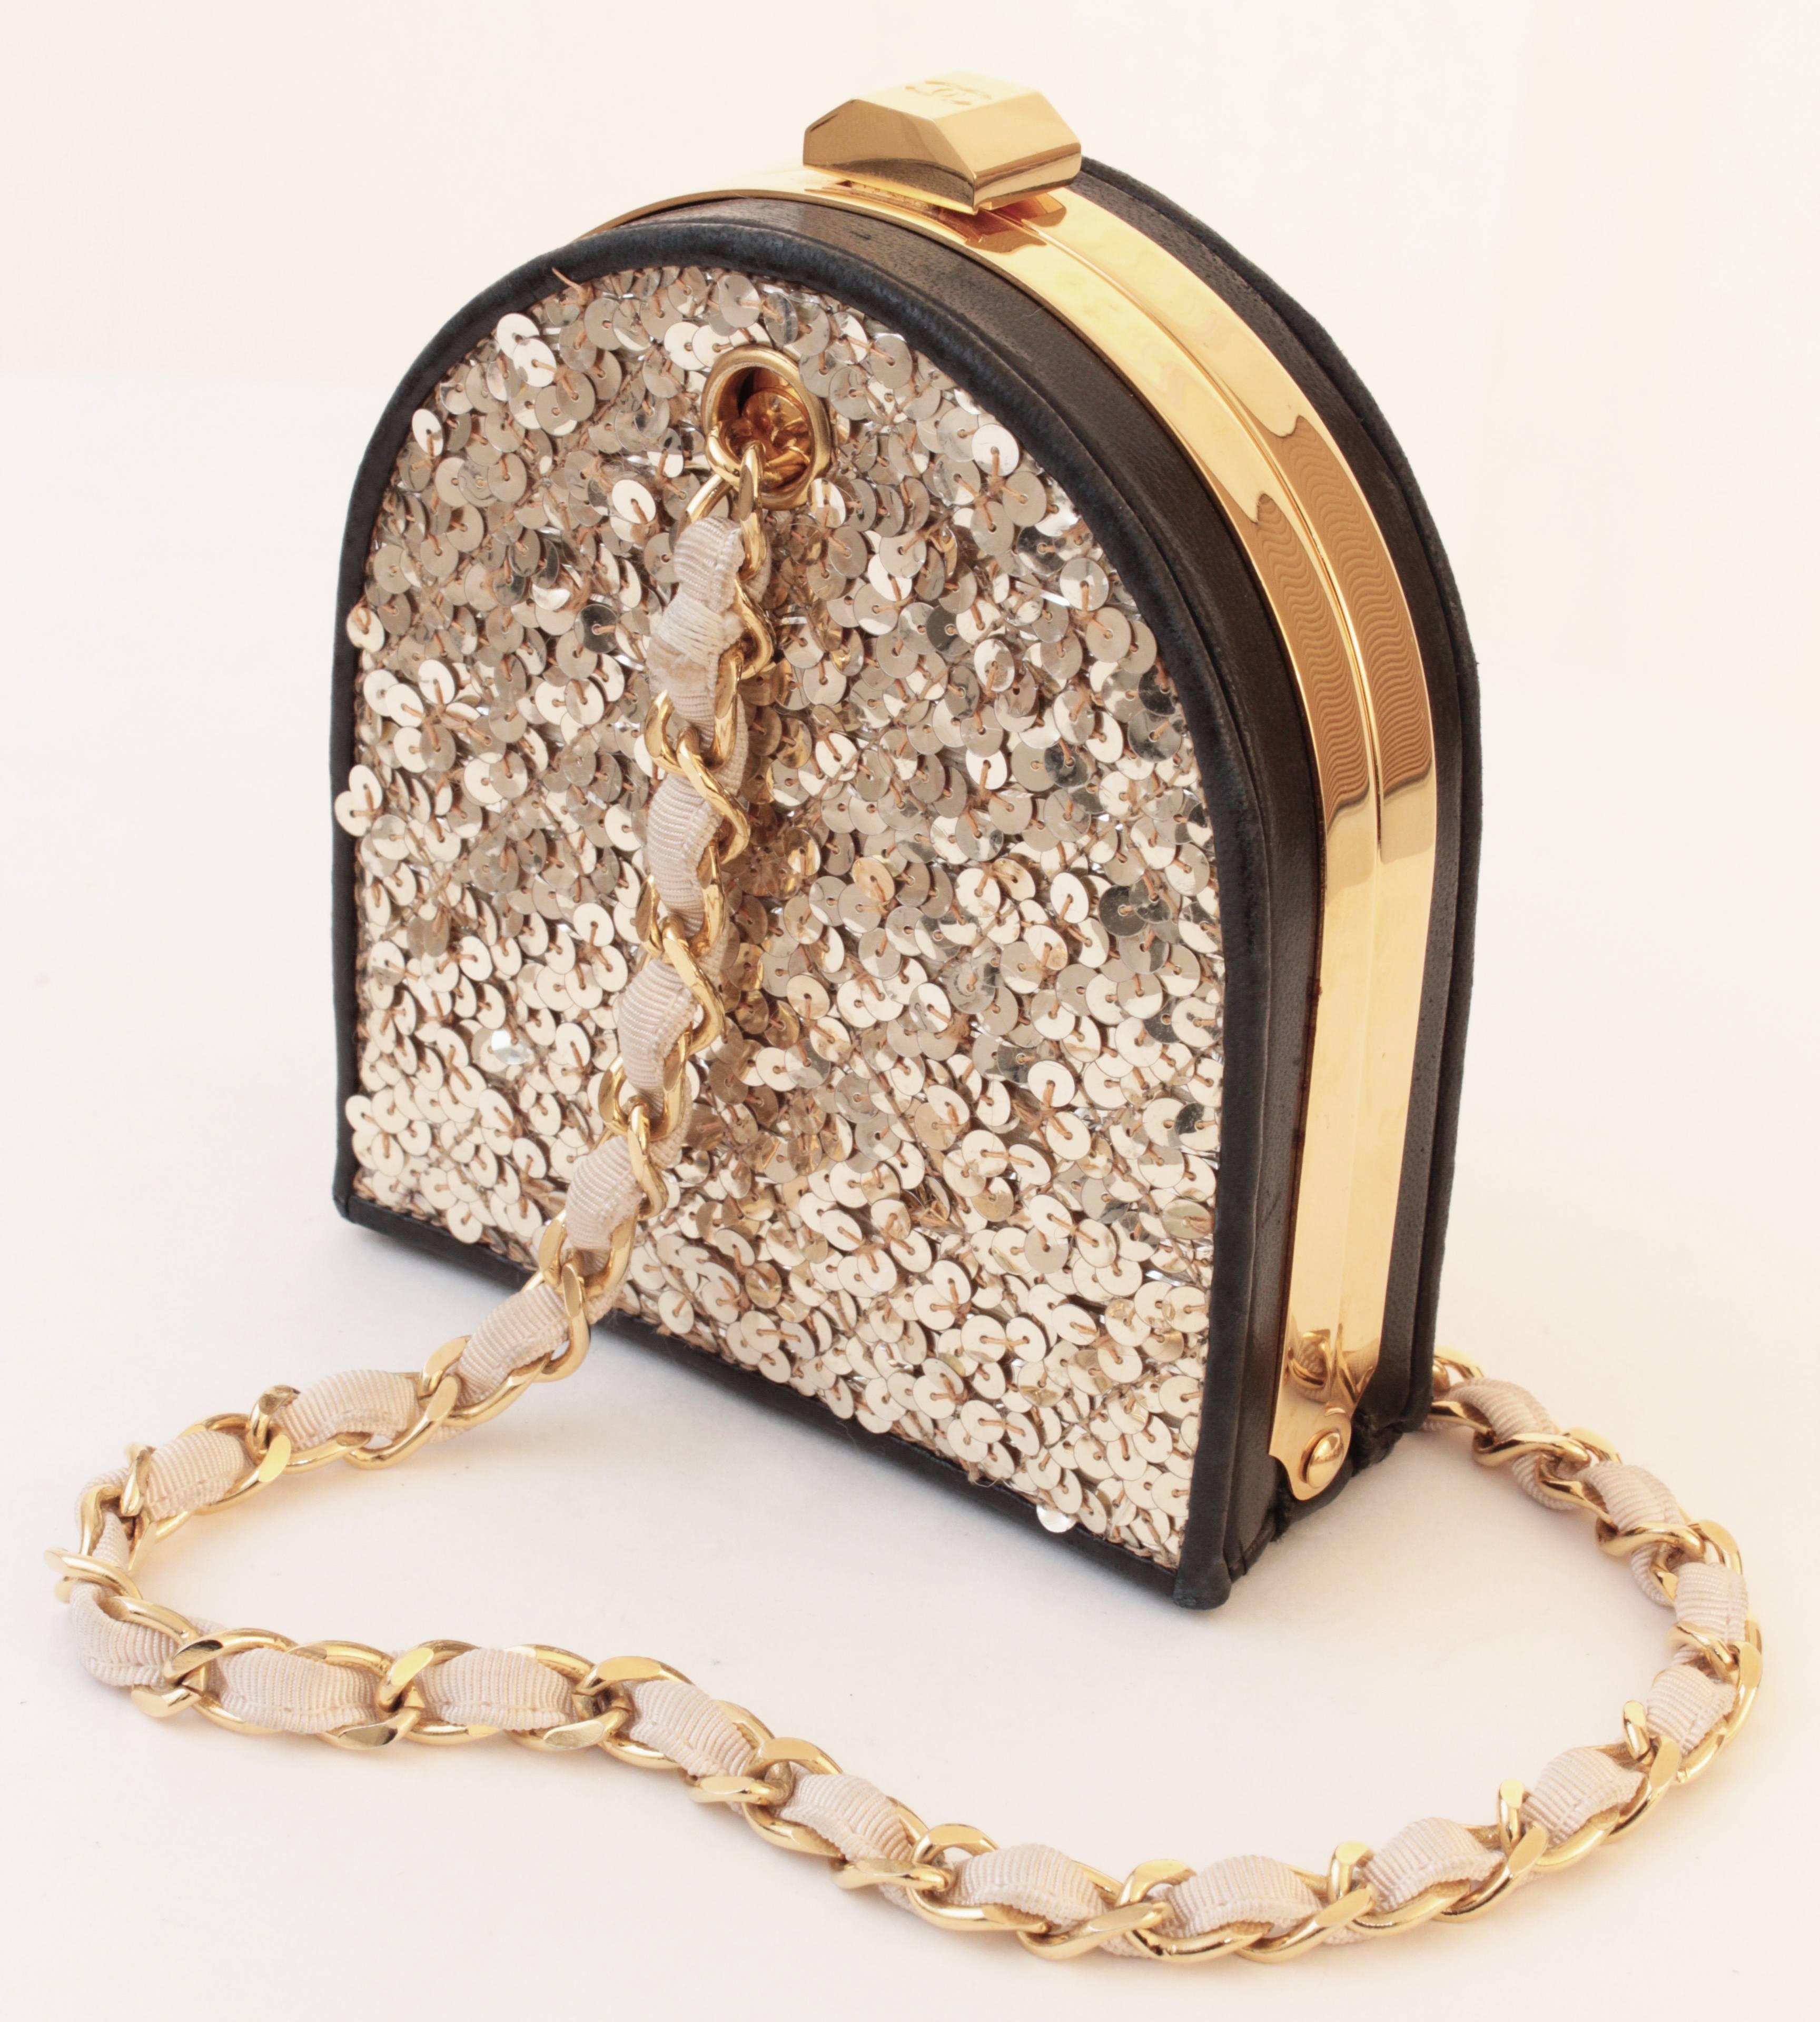 Women's or Men's Chanel Gold and Black Leather Evening Bag with Sequins Chain Strap CC Logo 80s 